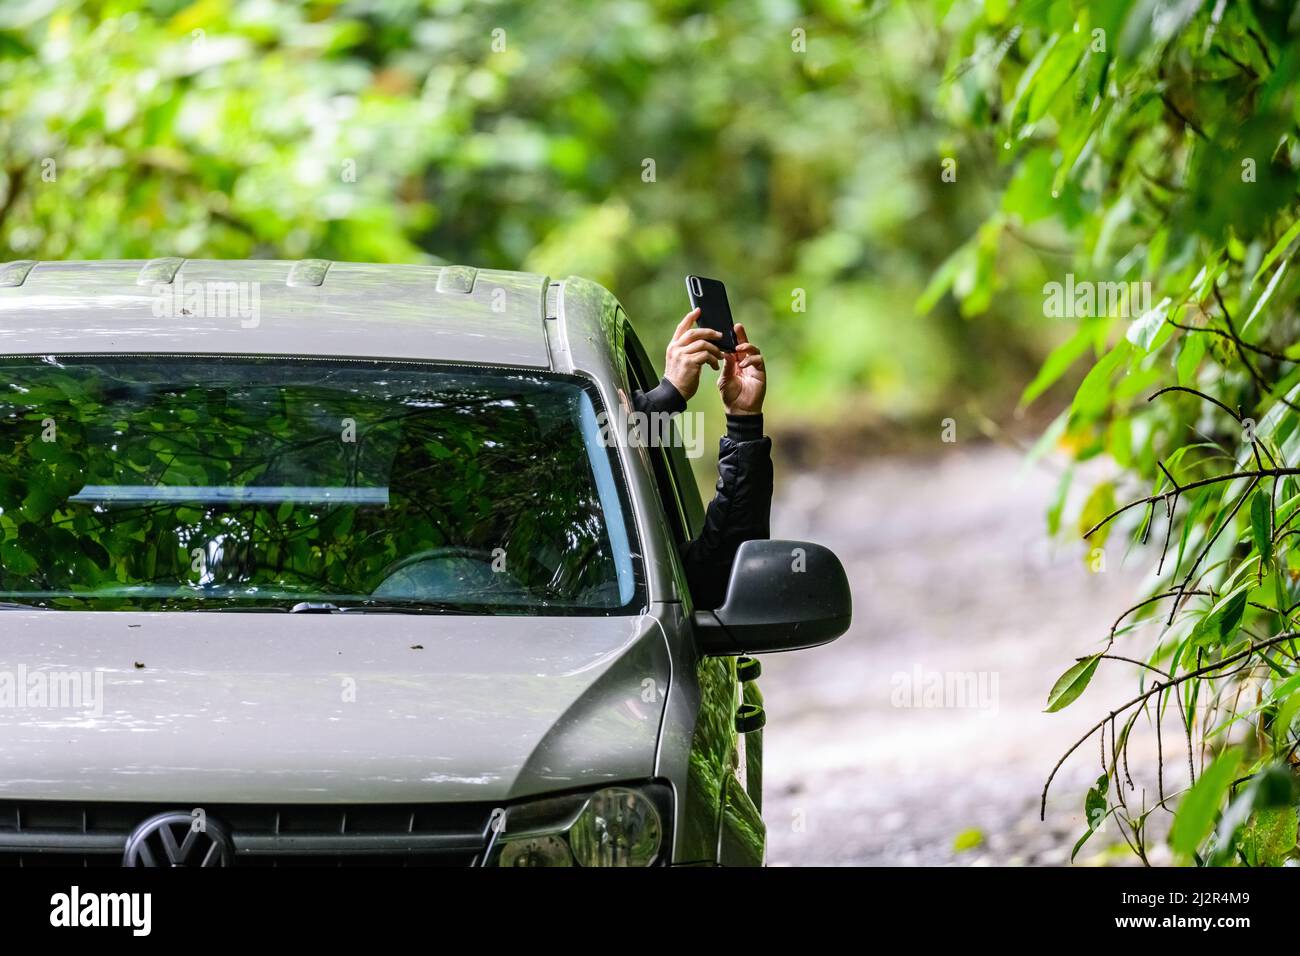 A man taking a cell phone picture from his car window. Colombia, South America. Stock Photo